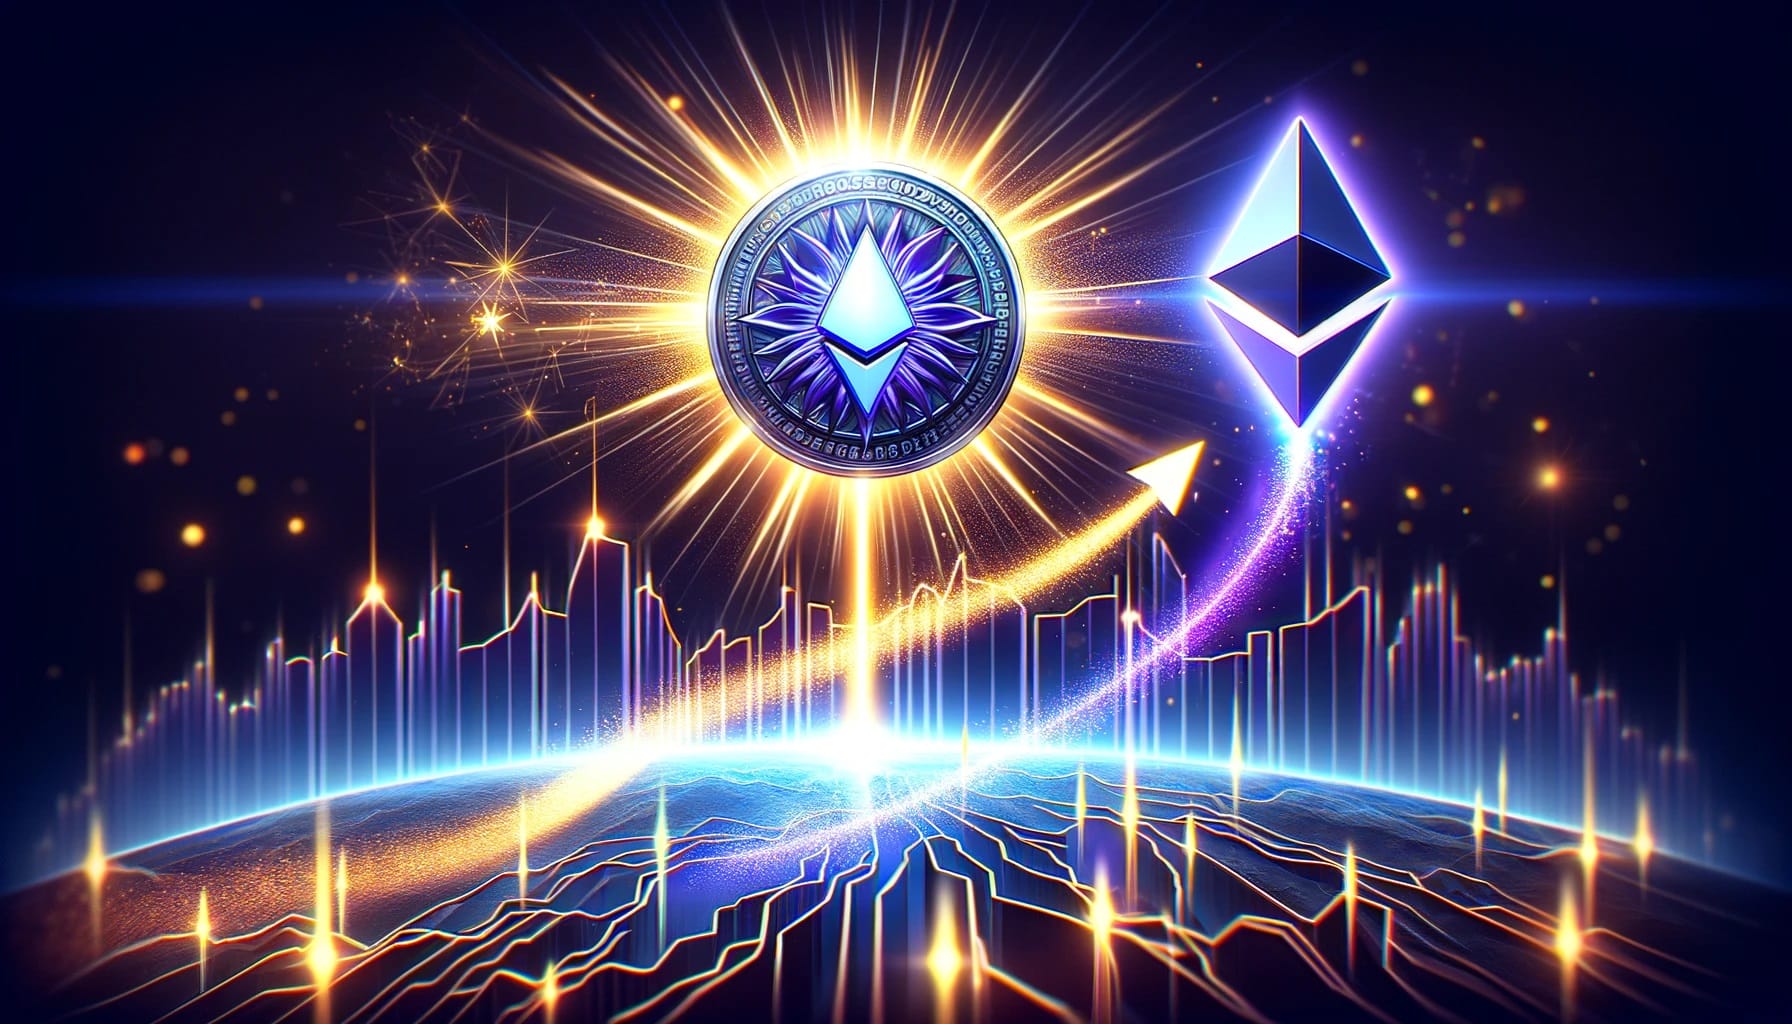 Solana Price Prediction as SOL Reaches Highest Level Since December 2021 – Can SOL Overtake Ethereum?